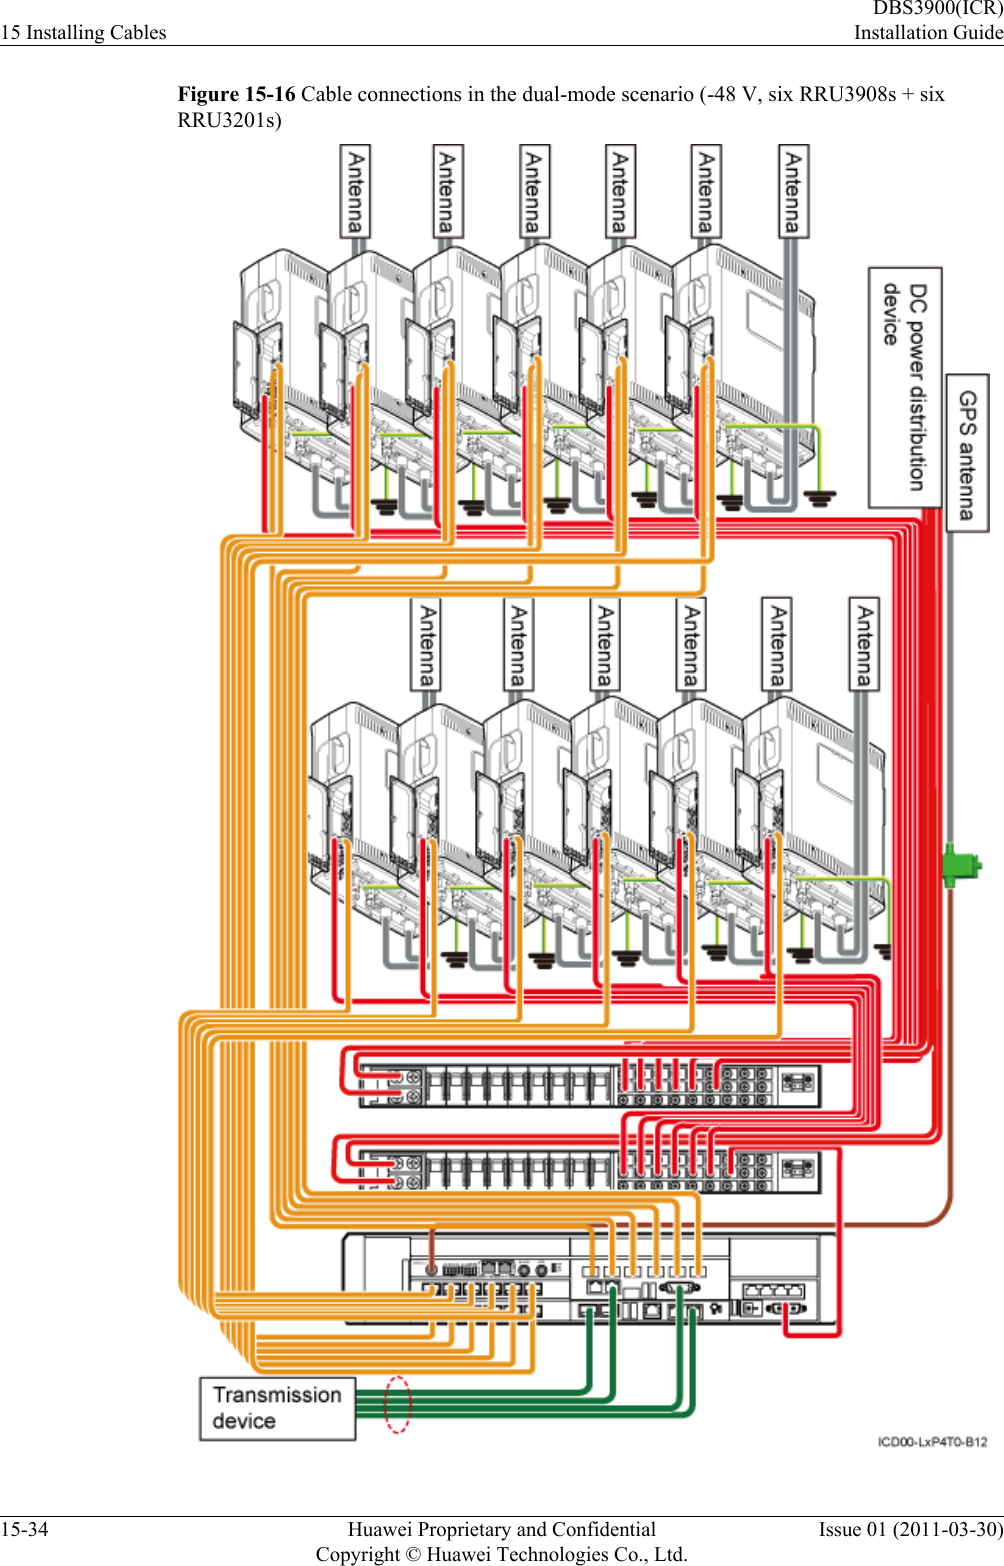 Figure 15-16 Cable connections in the dual-mode scenario (-48 V, six RRU3908s + sixRRU3201s)15 Installing CablesDBS3900(ICR)Installation Guide15-34 Huawei Proprietary and ConfidentialCopyright © Huawei Technologies Co., Ltd.Issue 01 (2011-03-30)